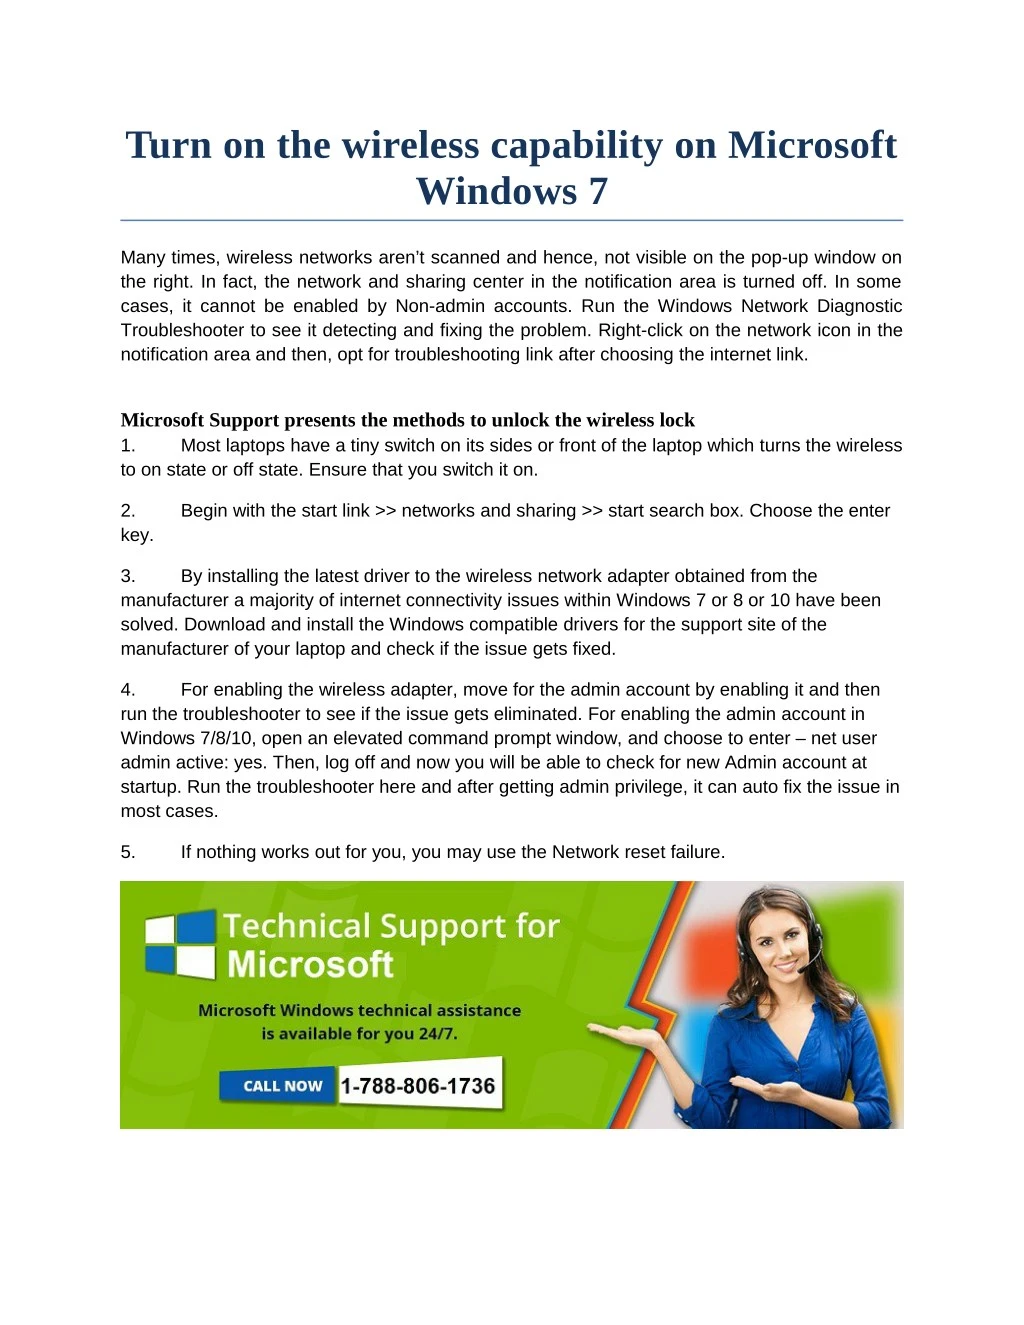 how to turn on wireless in windows 7